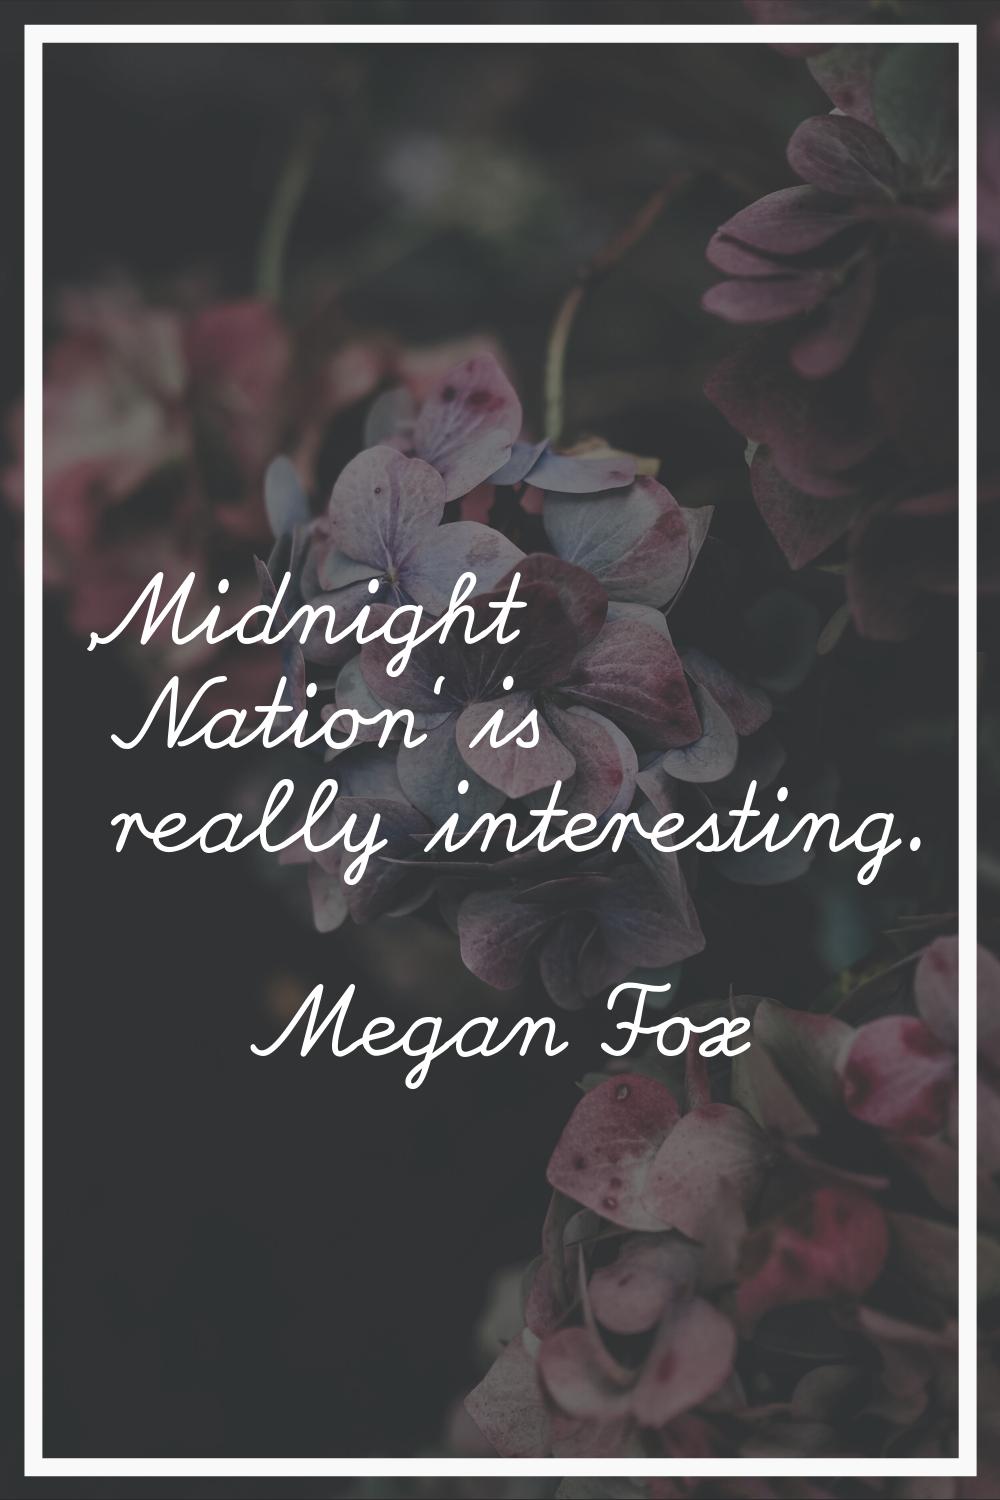 'Midnight Nation' is really interesting.